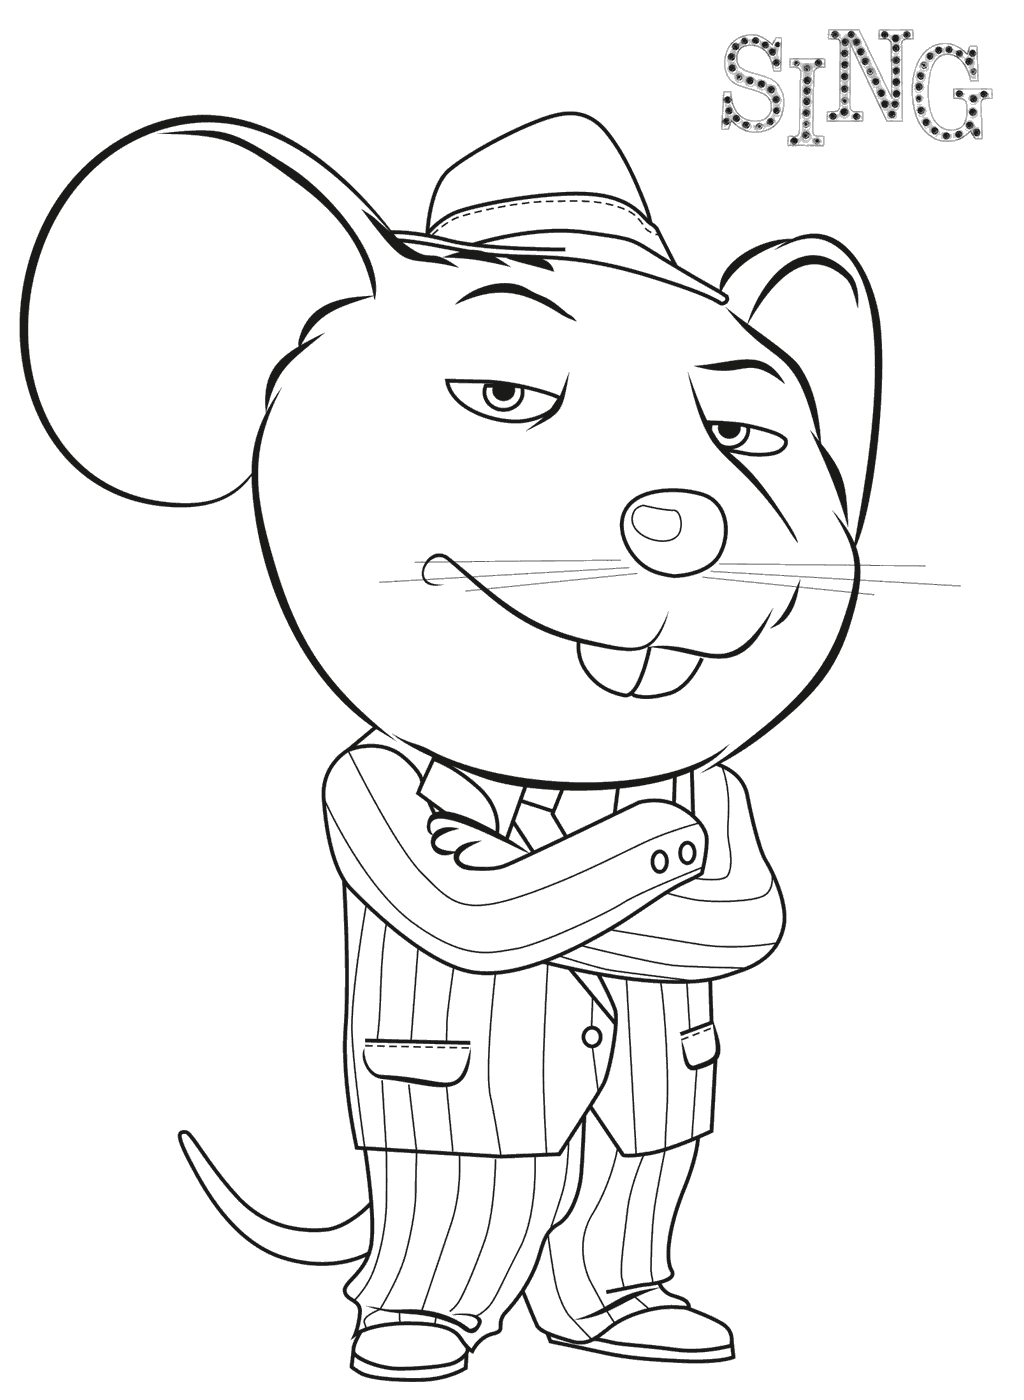 Moie Coloring Page